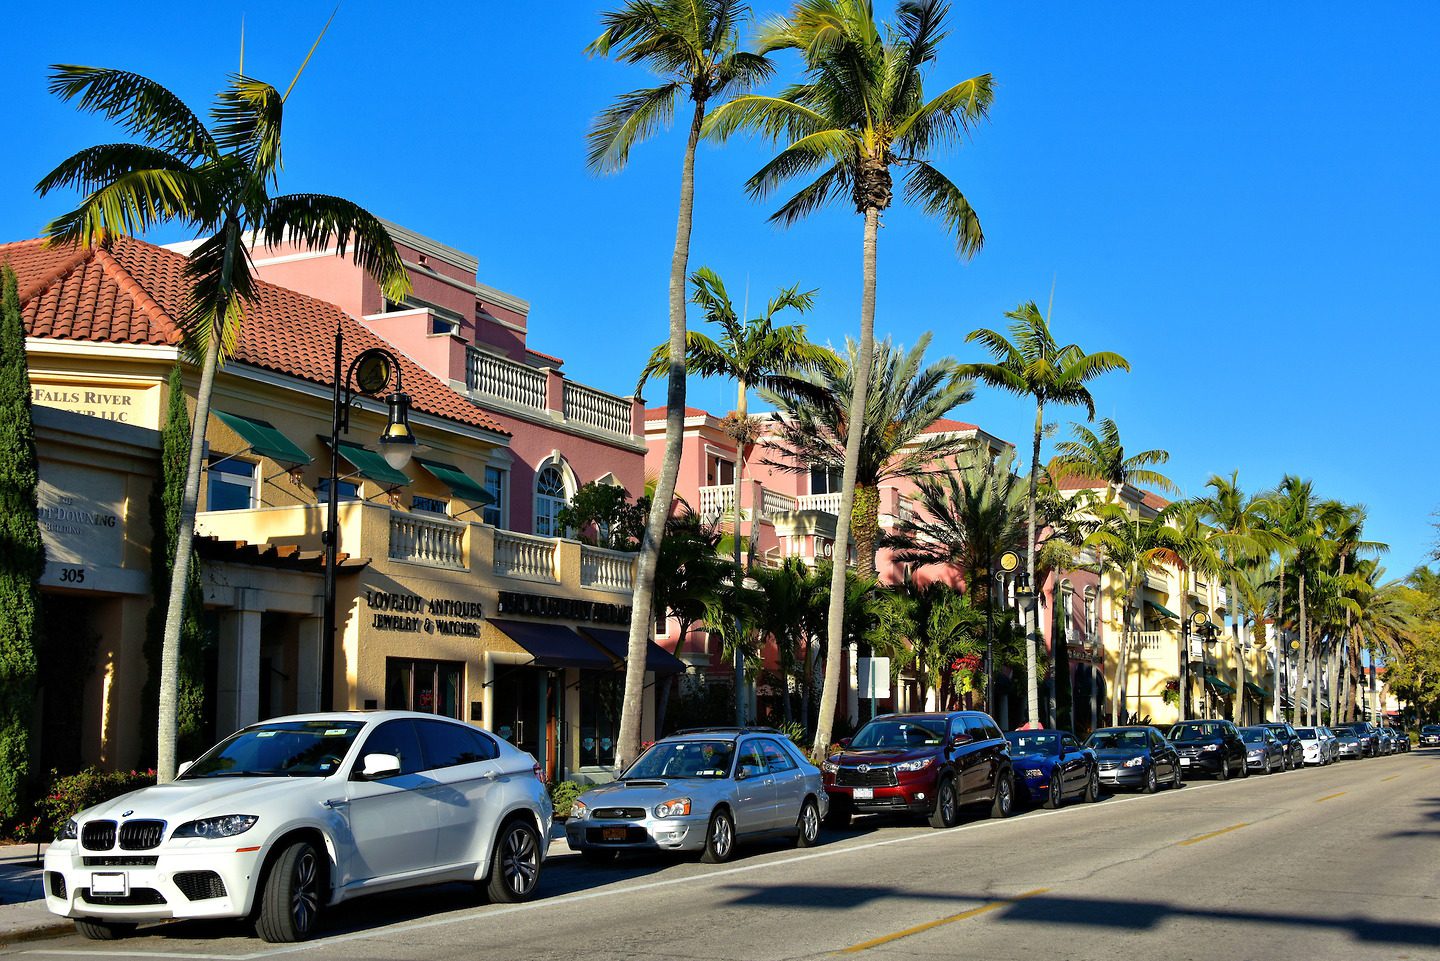 History of Downtown Naples, Florida